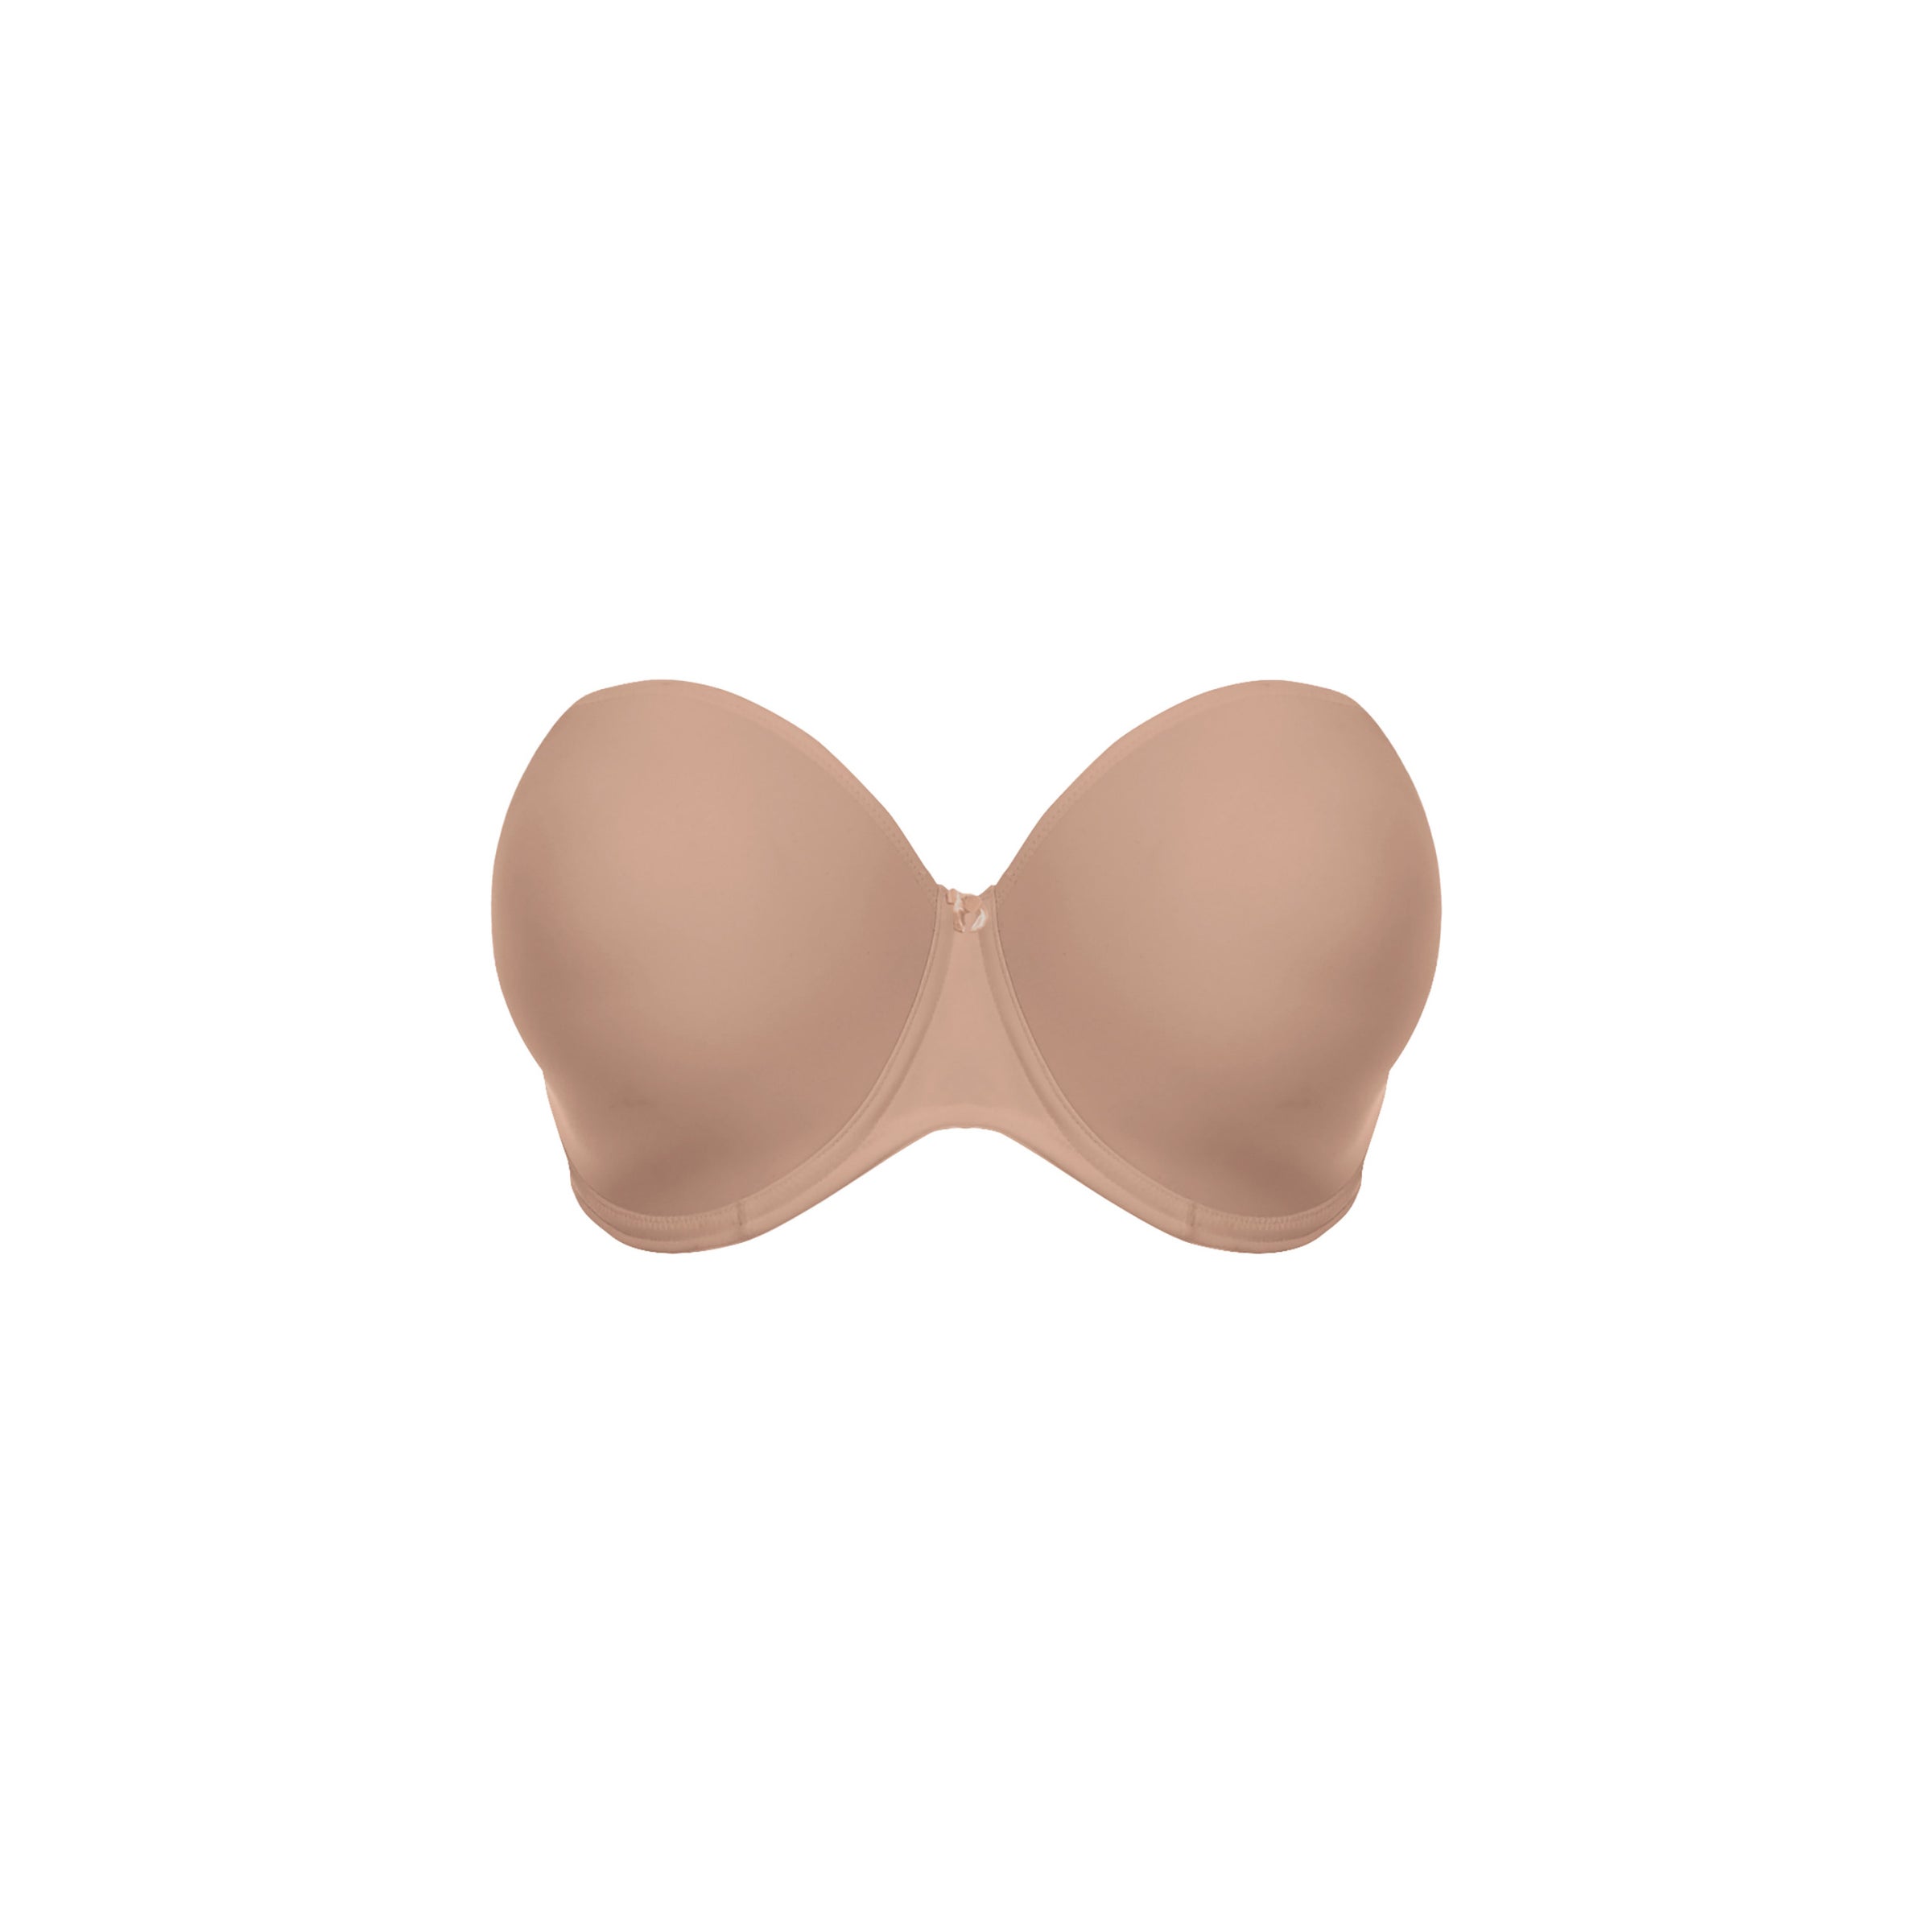 Elomi Smoothing Underwire Foam Molded Strapless Bra, Nude, 38DD